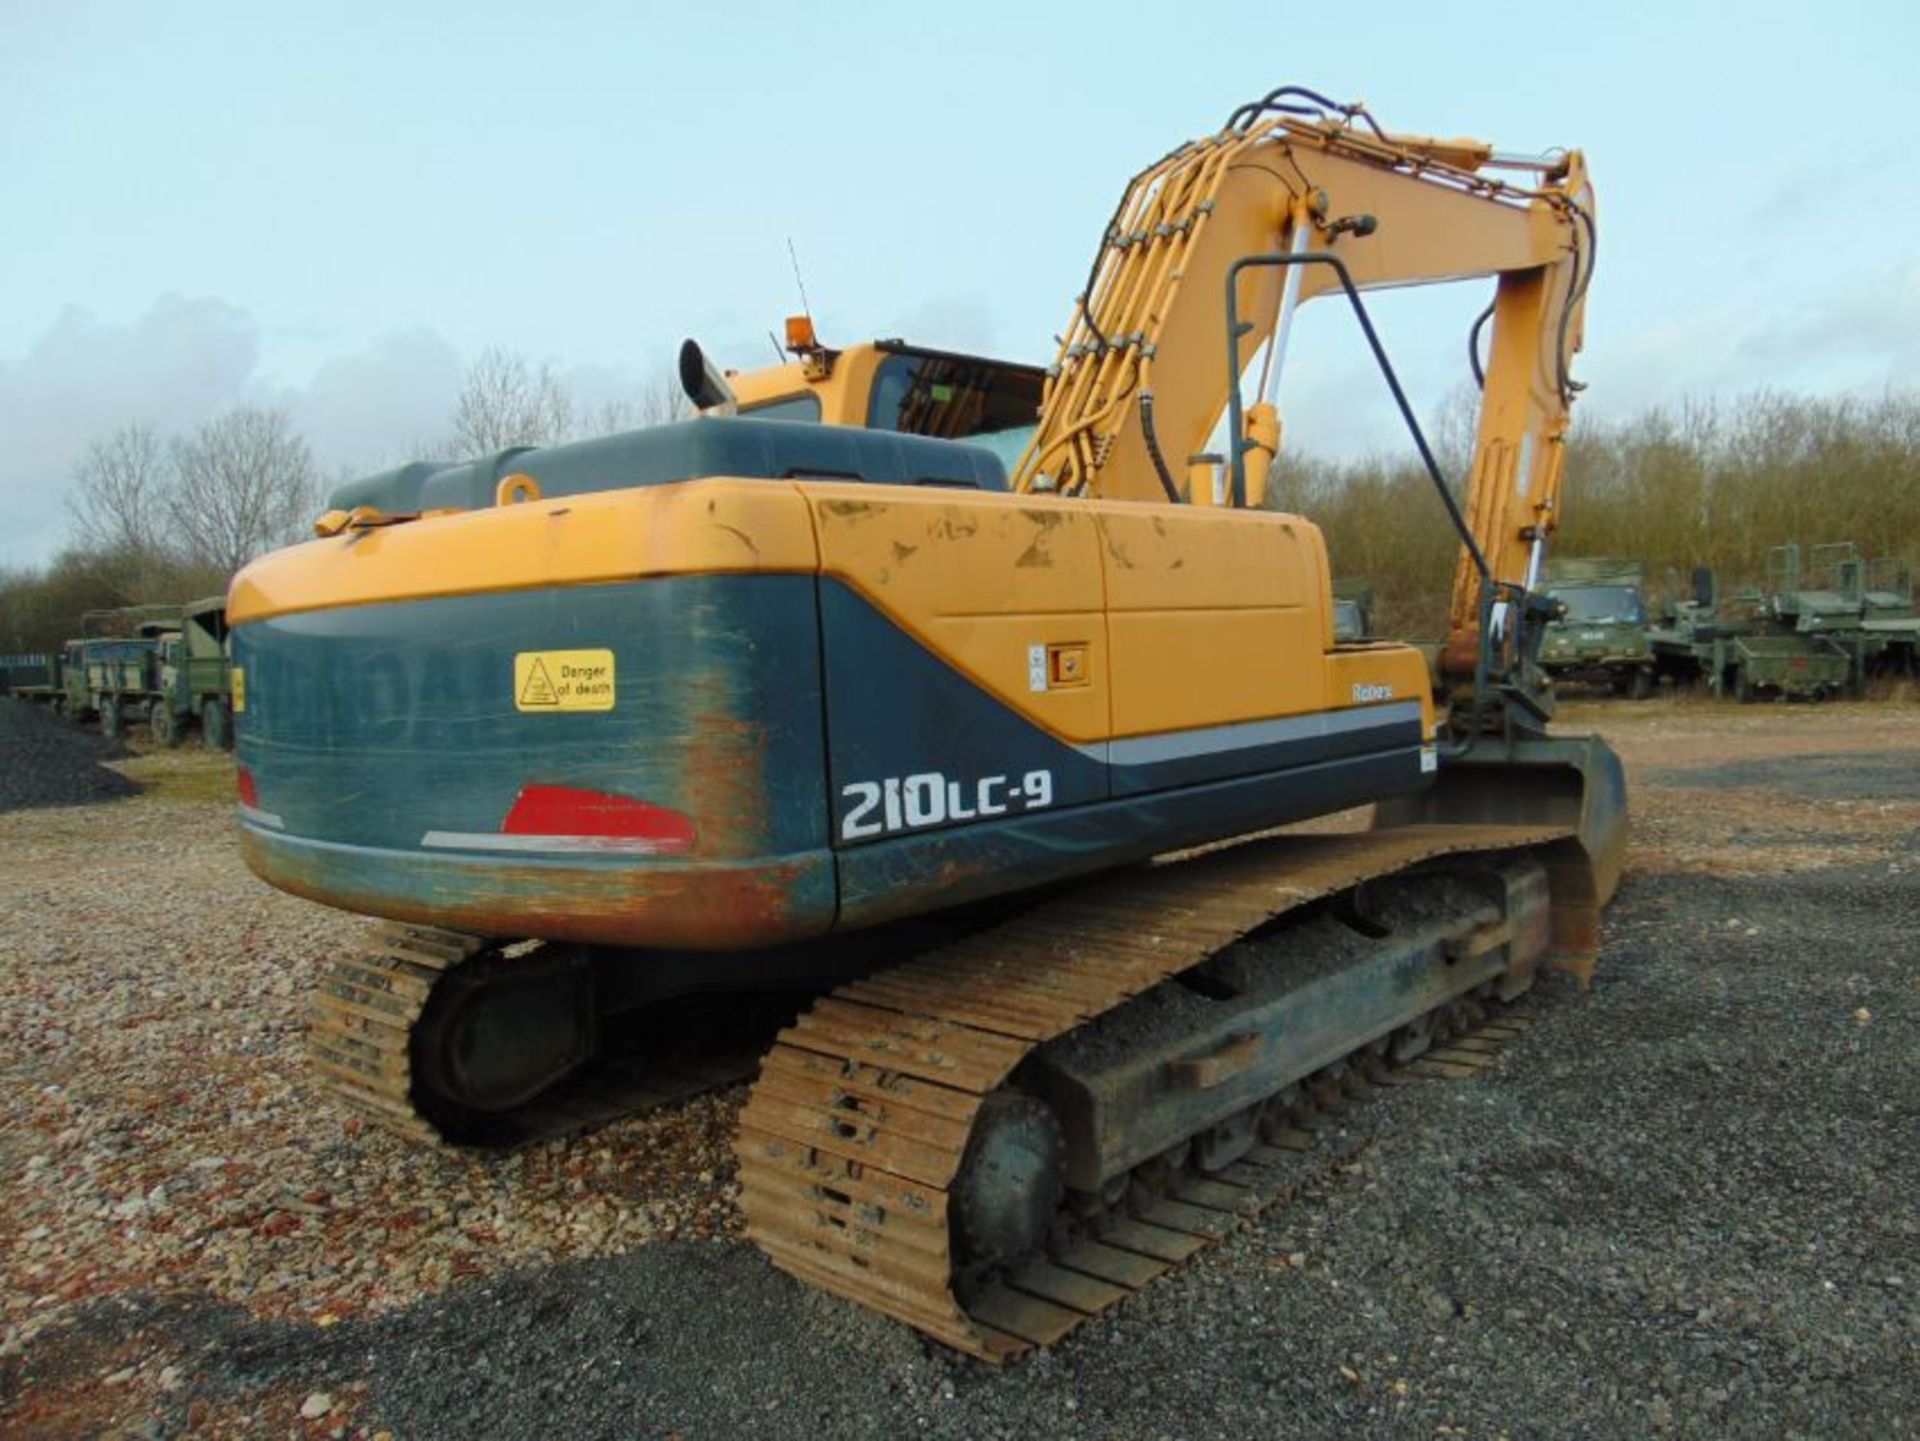 2012 Hyundai Robex 210 LC-9 Crawler Excavator ONLY 1,148 Hours! Very High Specification - Image 8 of 25